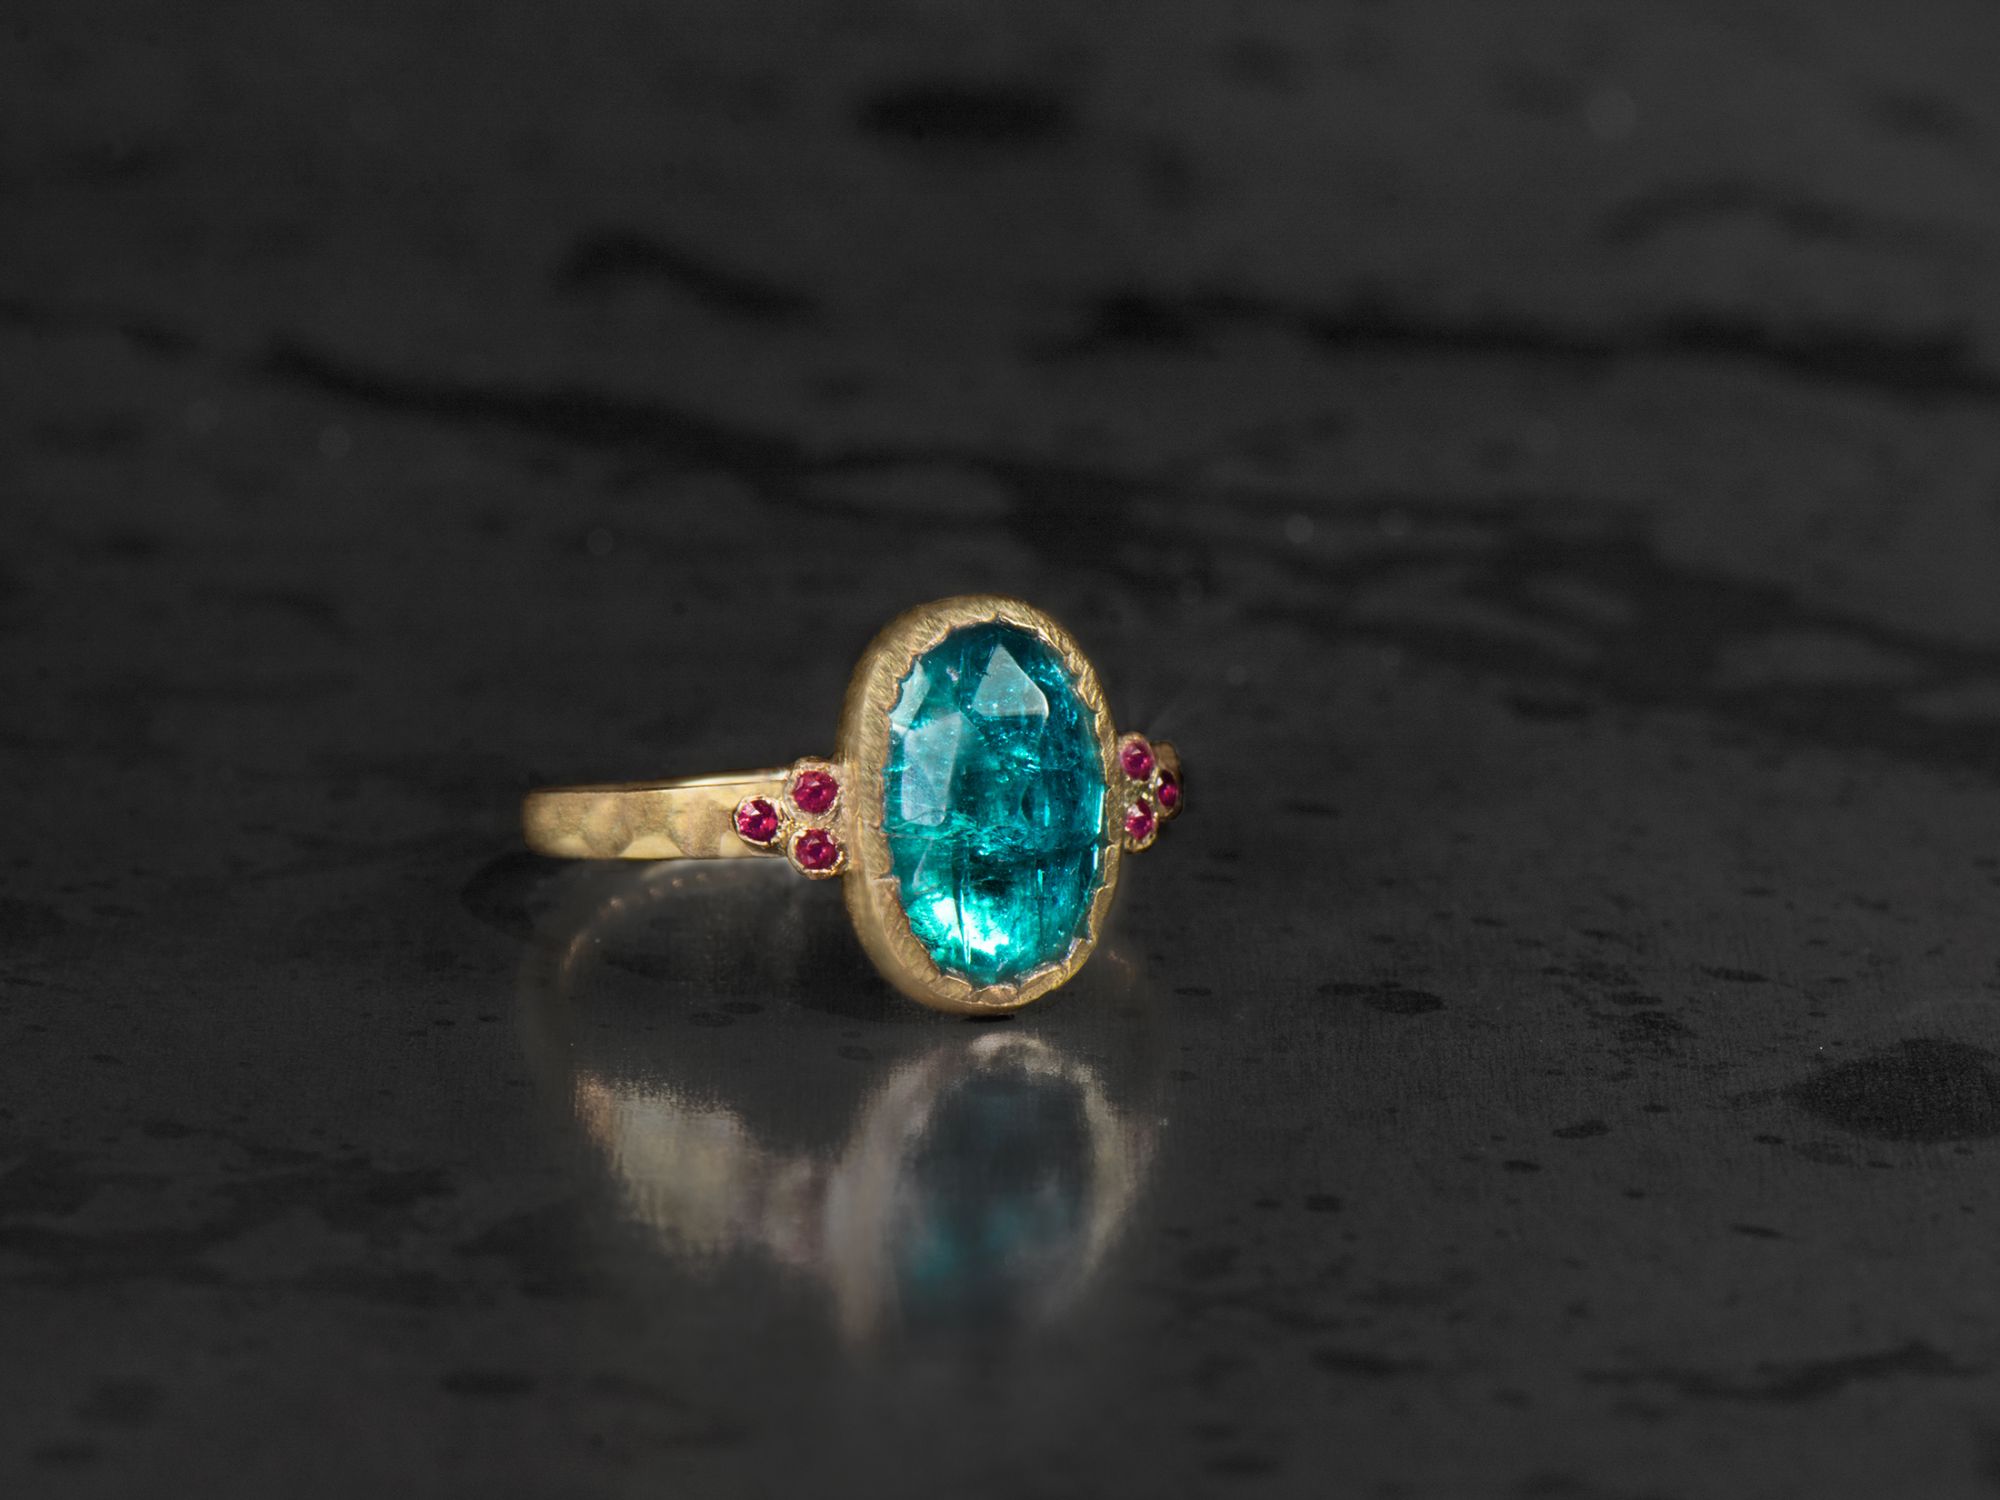 Queen rubies and light blue tourmaline ring by Emmanuelle Zysman